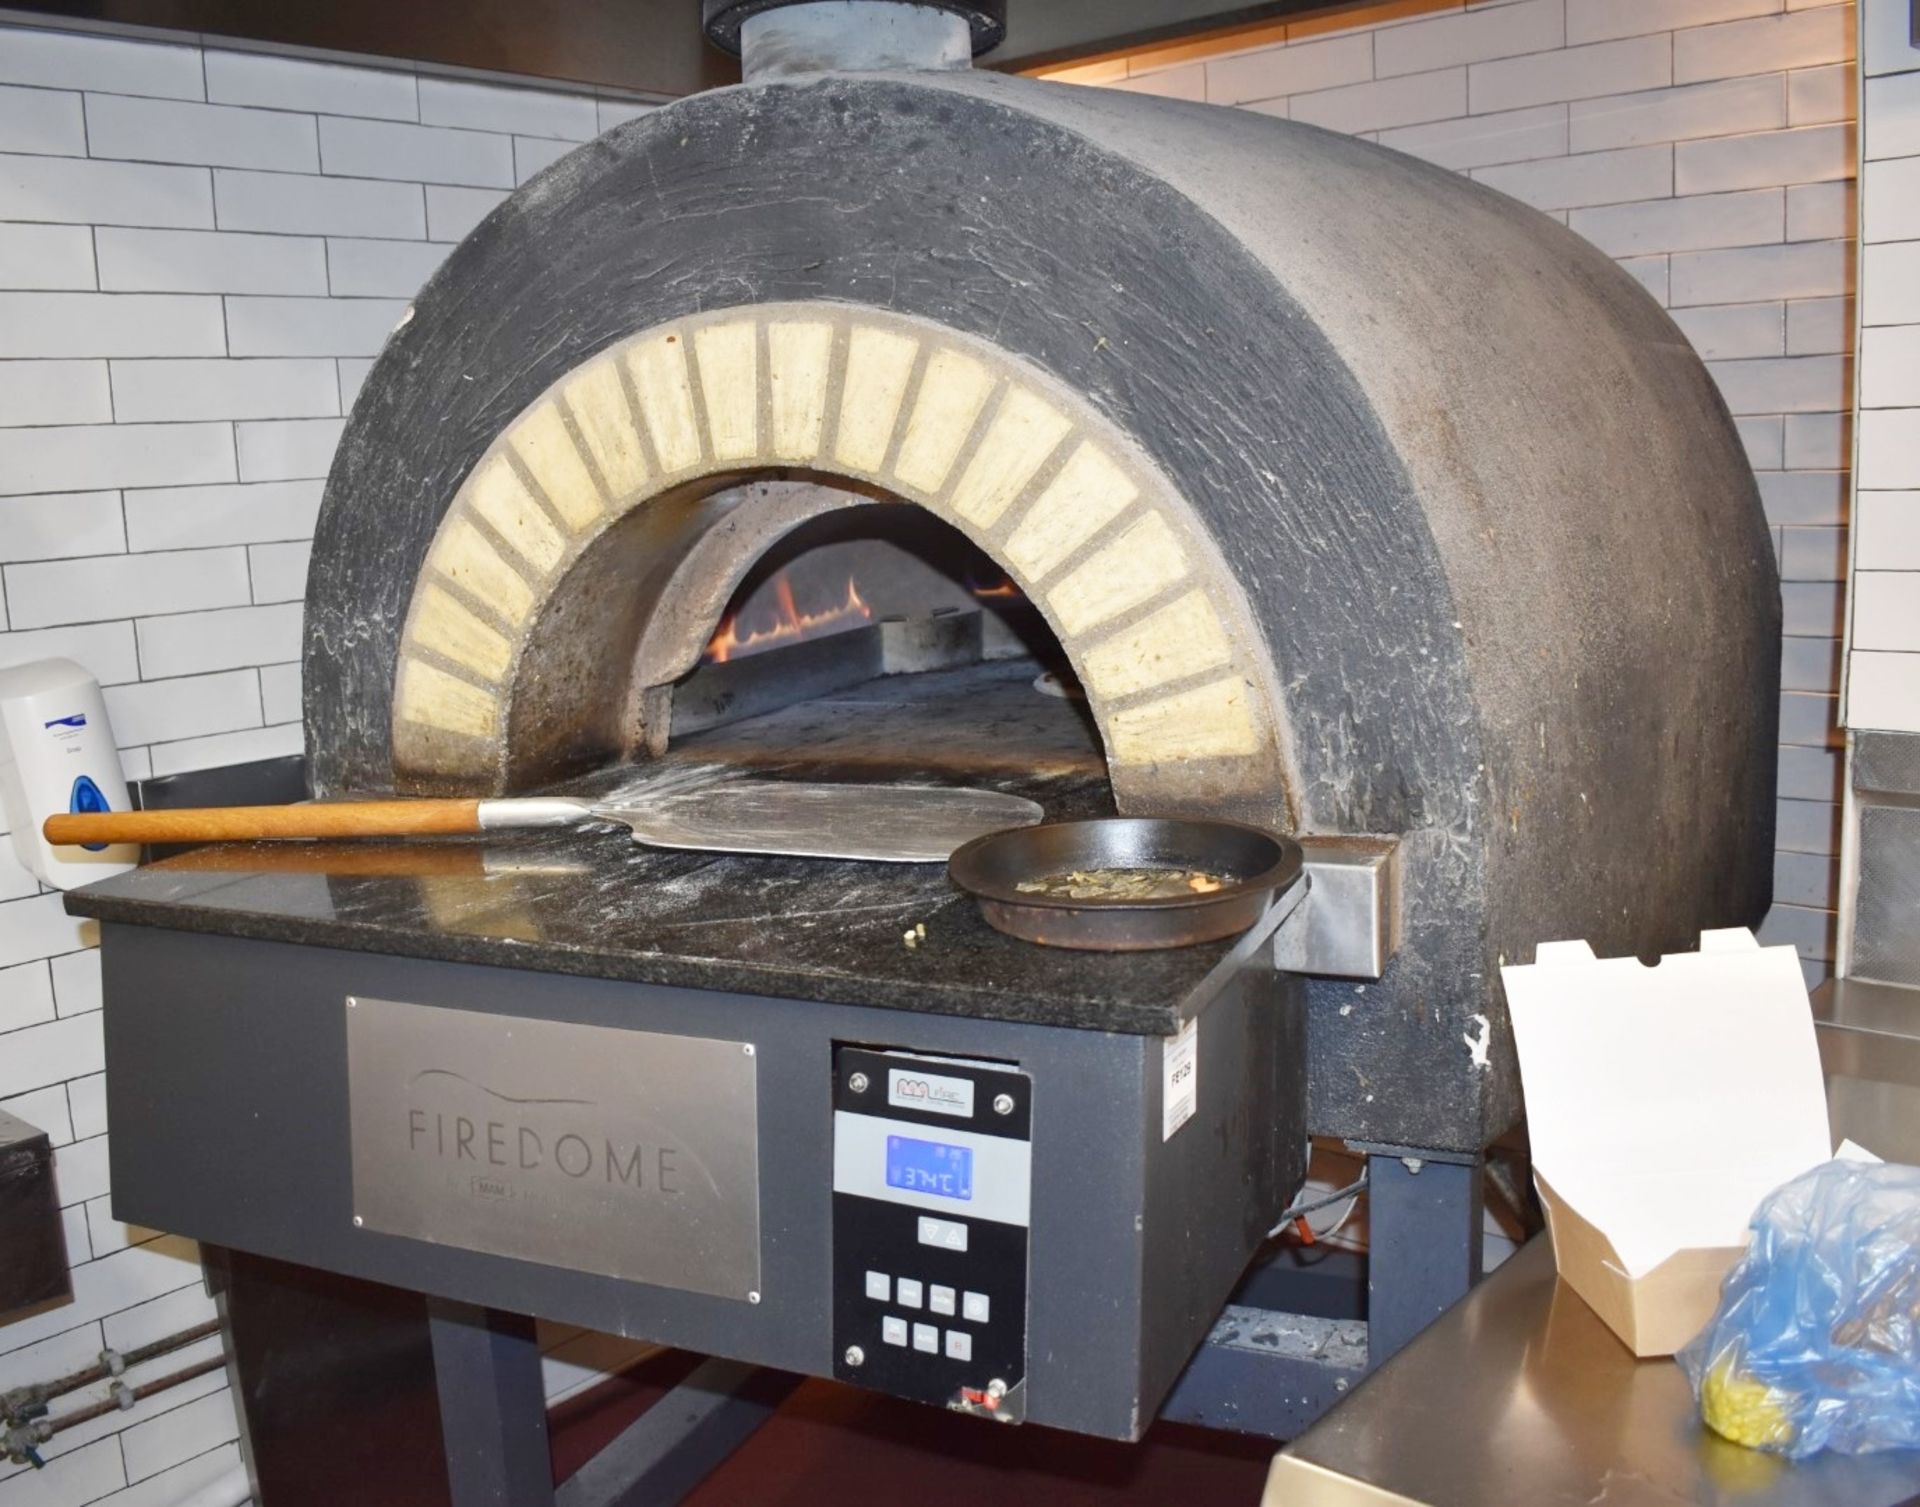 1 x MAM Firedome Commercial Stone Baked Gas Pizza Oven - Made in Italy - Type Modular Fire E - CL499 - Image 4 of 10